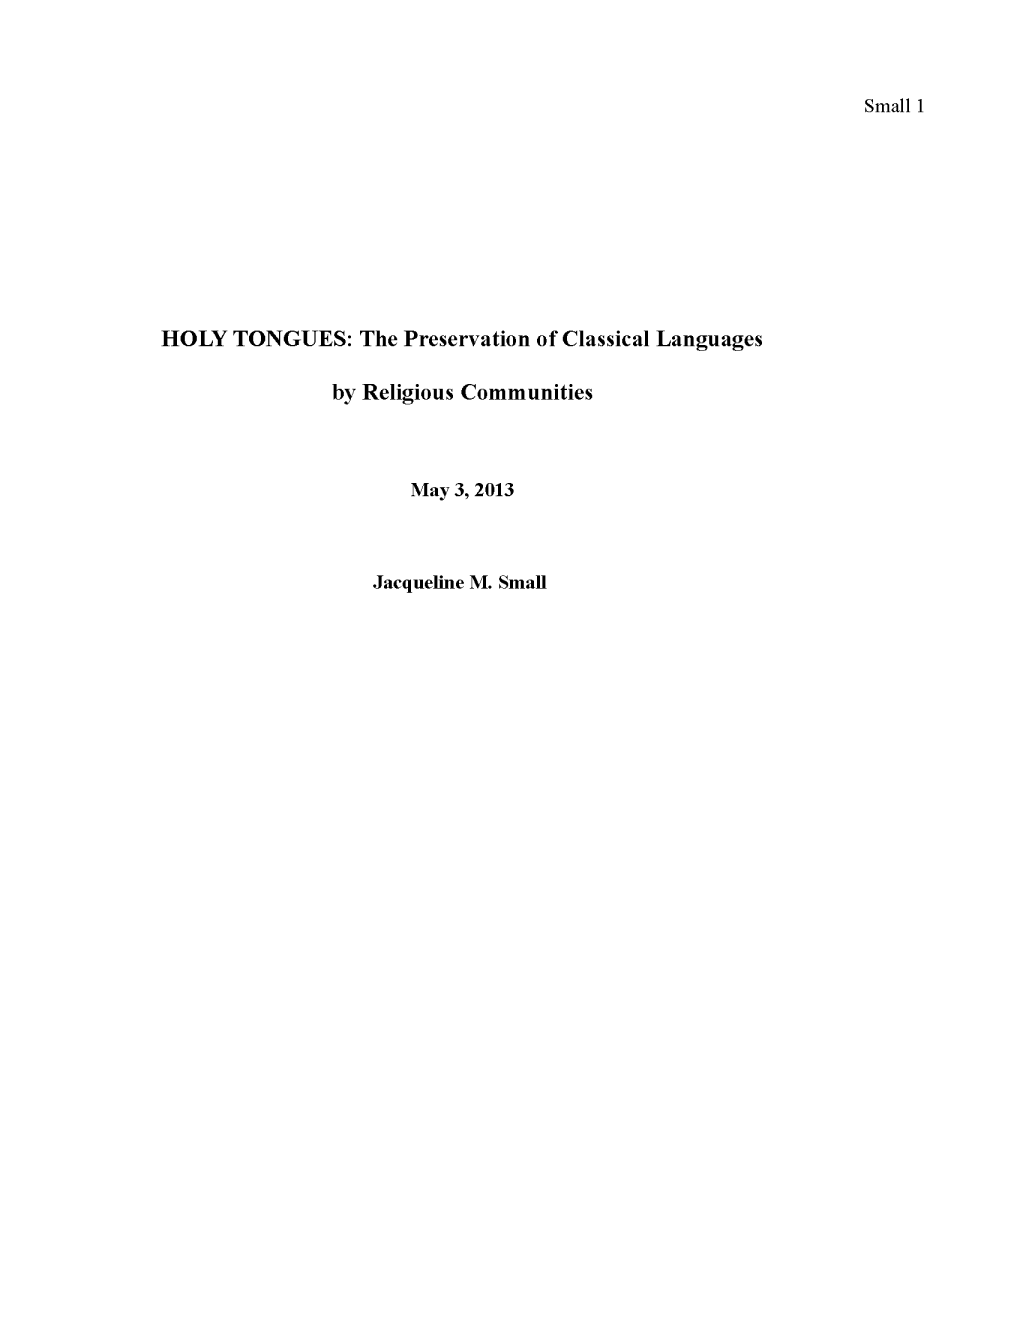 HOLY TONGUES: the Preservation of Classical Languages by Religious